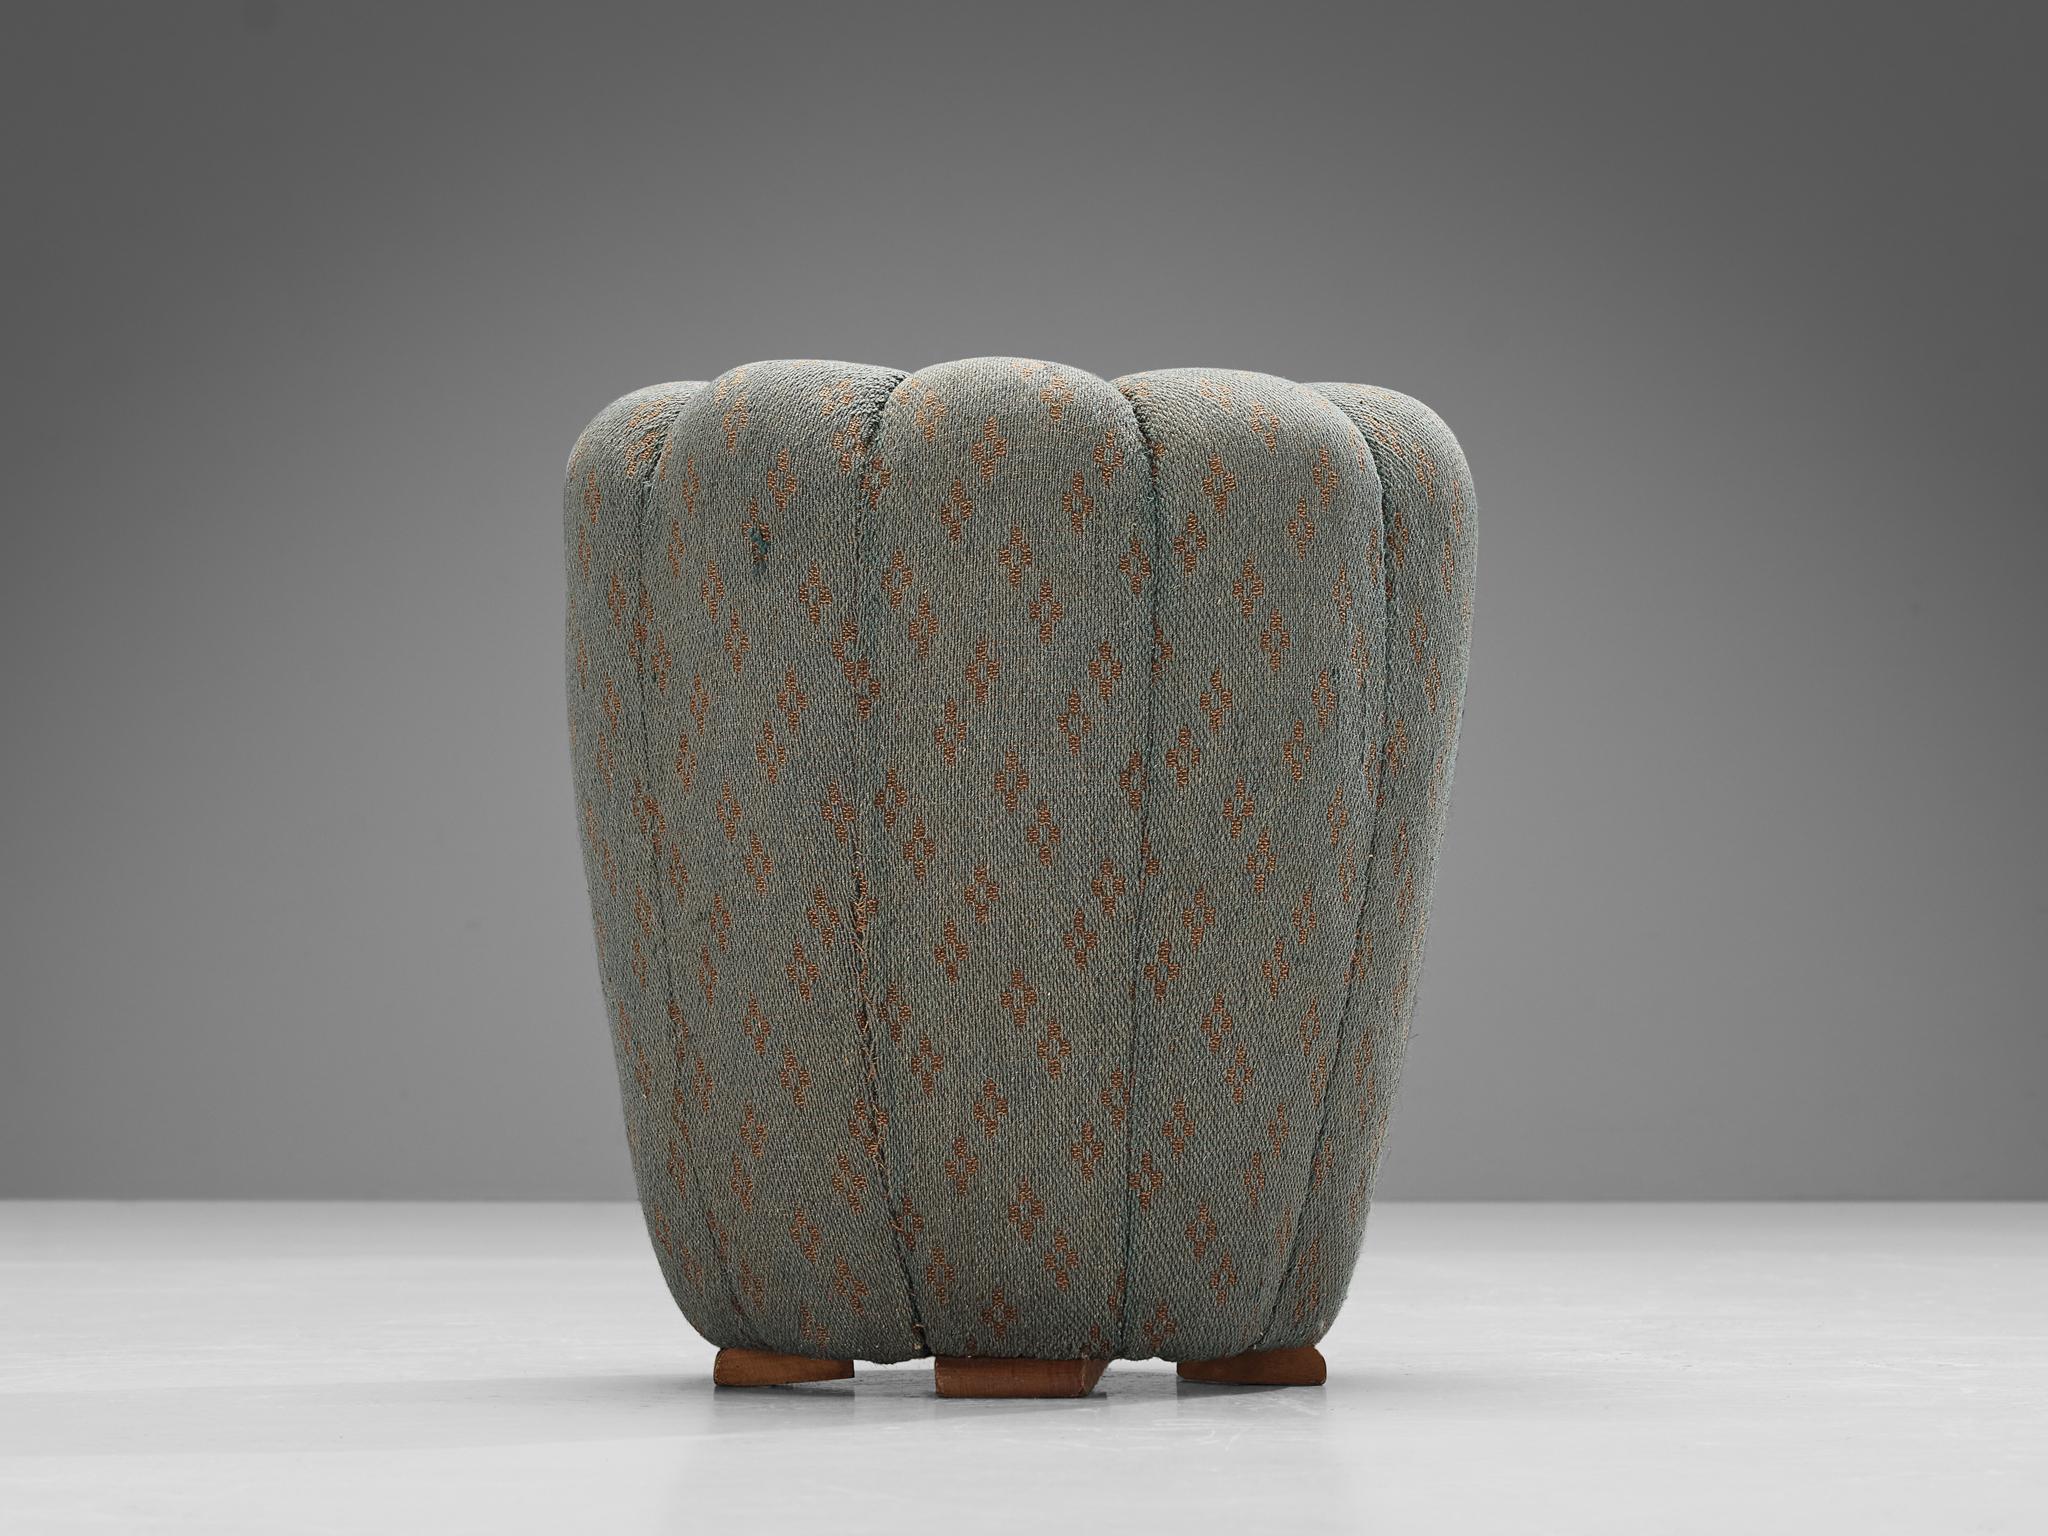 Art Deco Jindrich Halabala Stool in Decorative Upholstery  For Sale